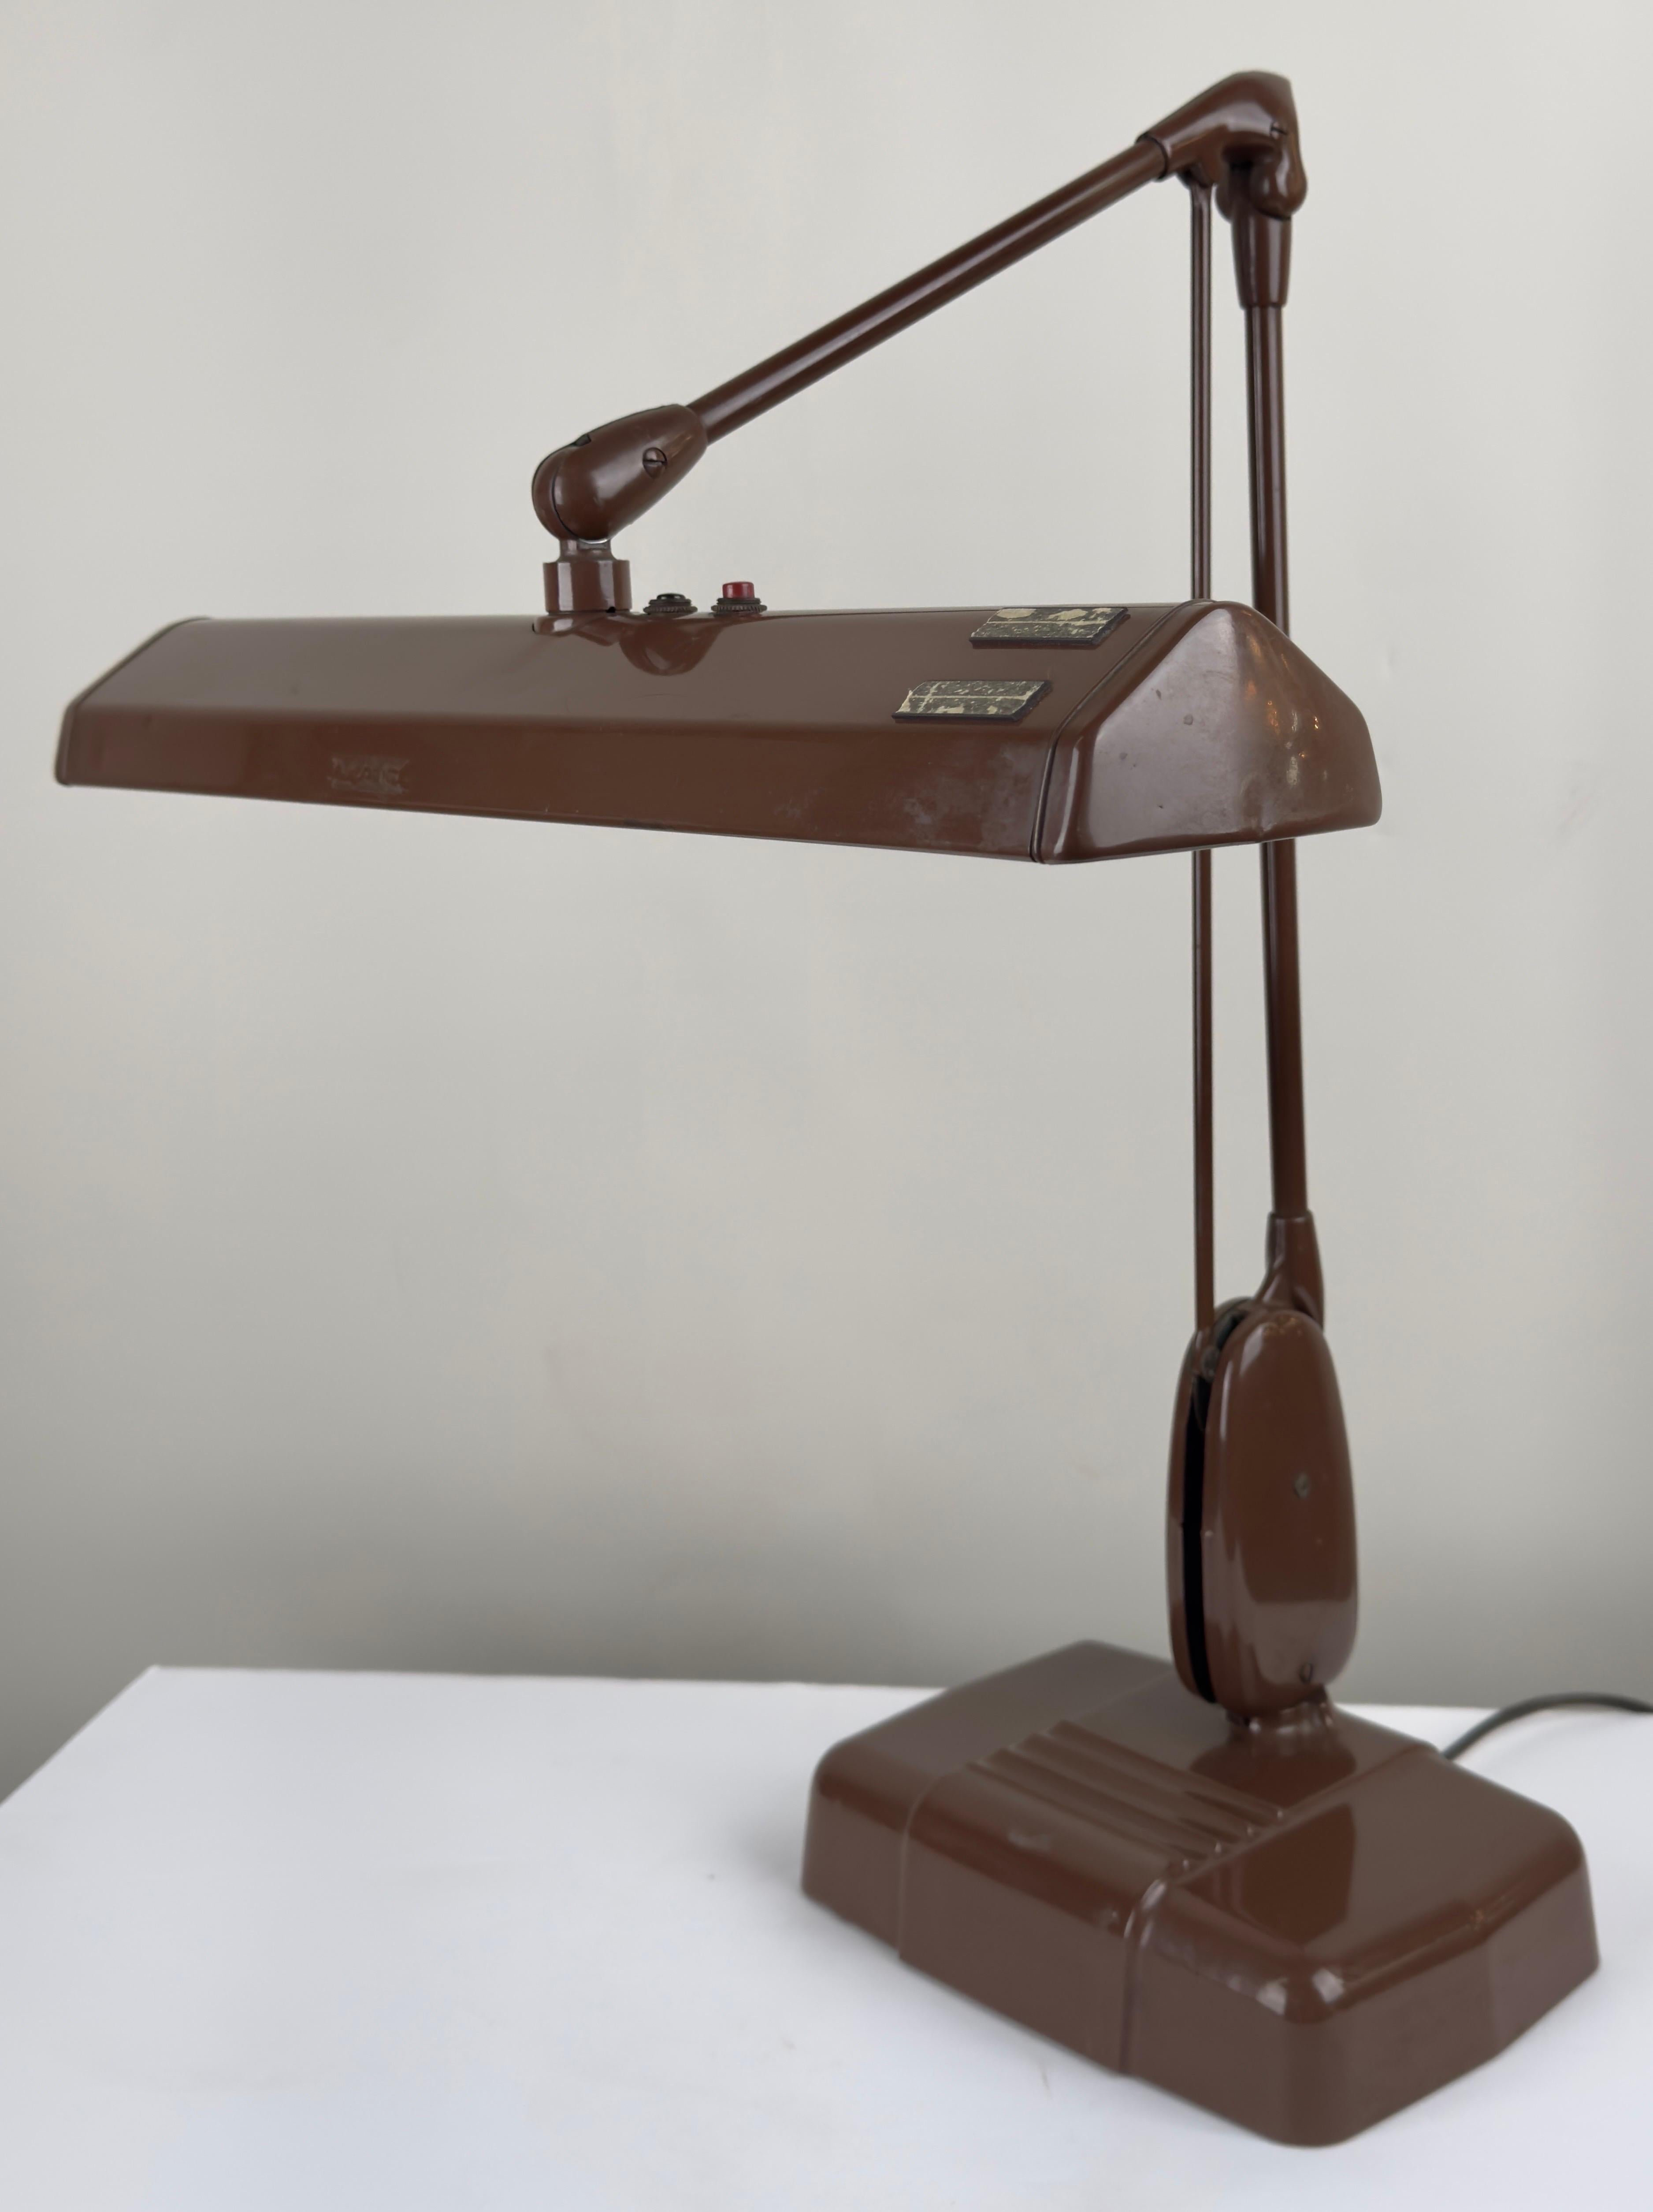 A 1950's Industrial floating fixture by Dazor model 2324, a testament to an era defined by innovation and functionality.  Crafted from robust metal and painted in a rich, lustrous brown hue, the lamp exudes an aura of rugged elegance. Its sturdy